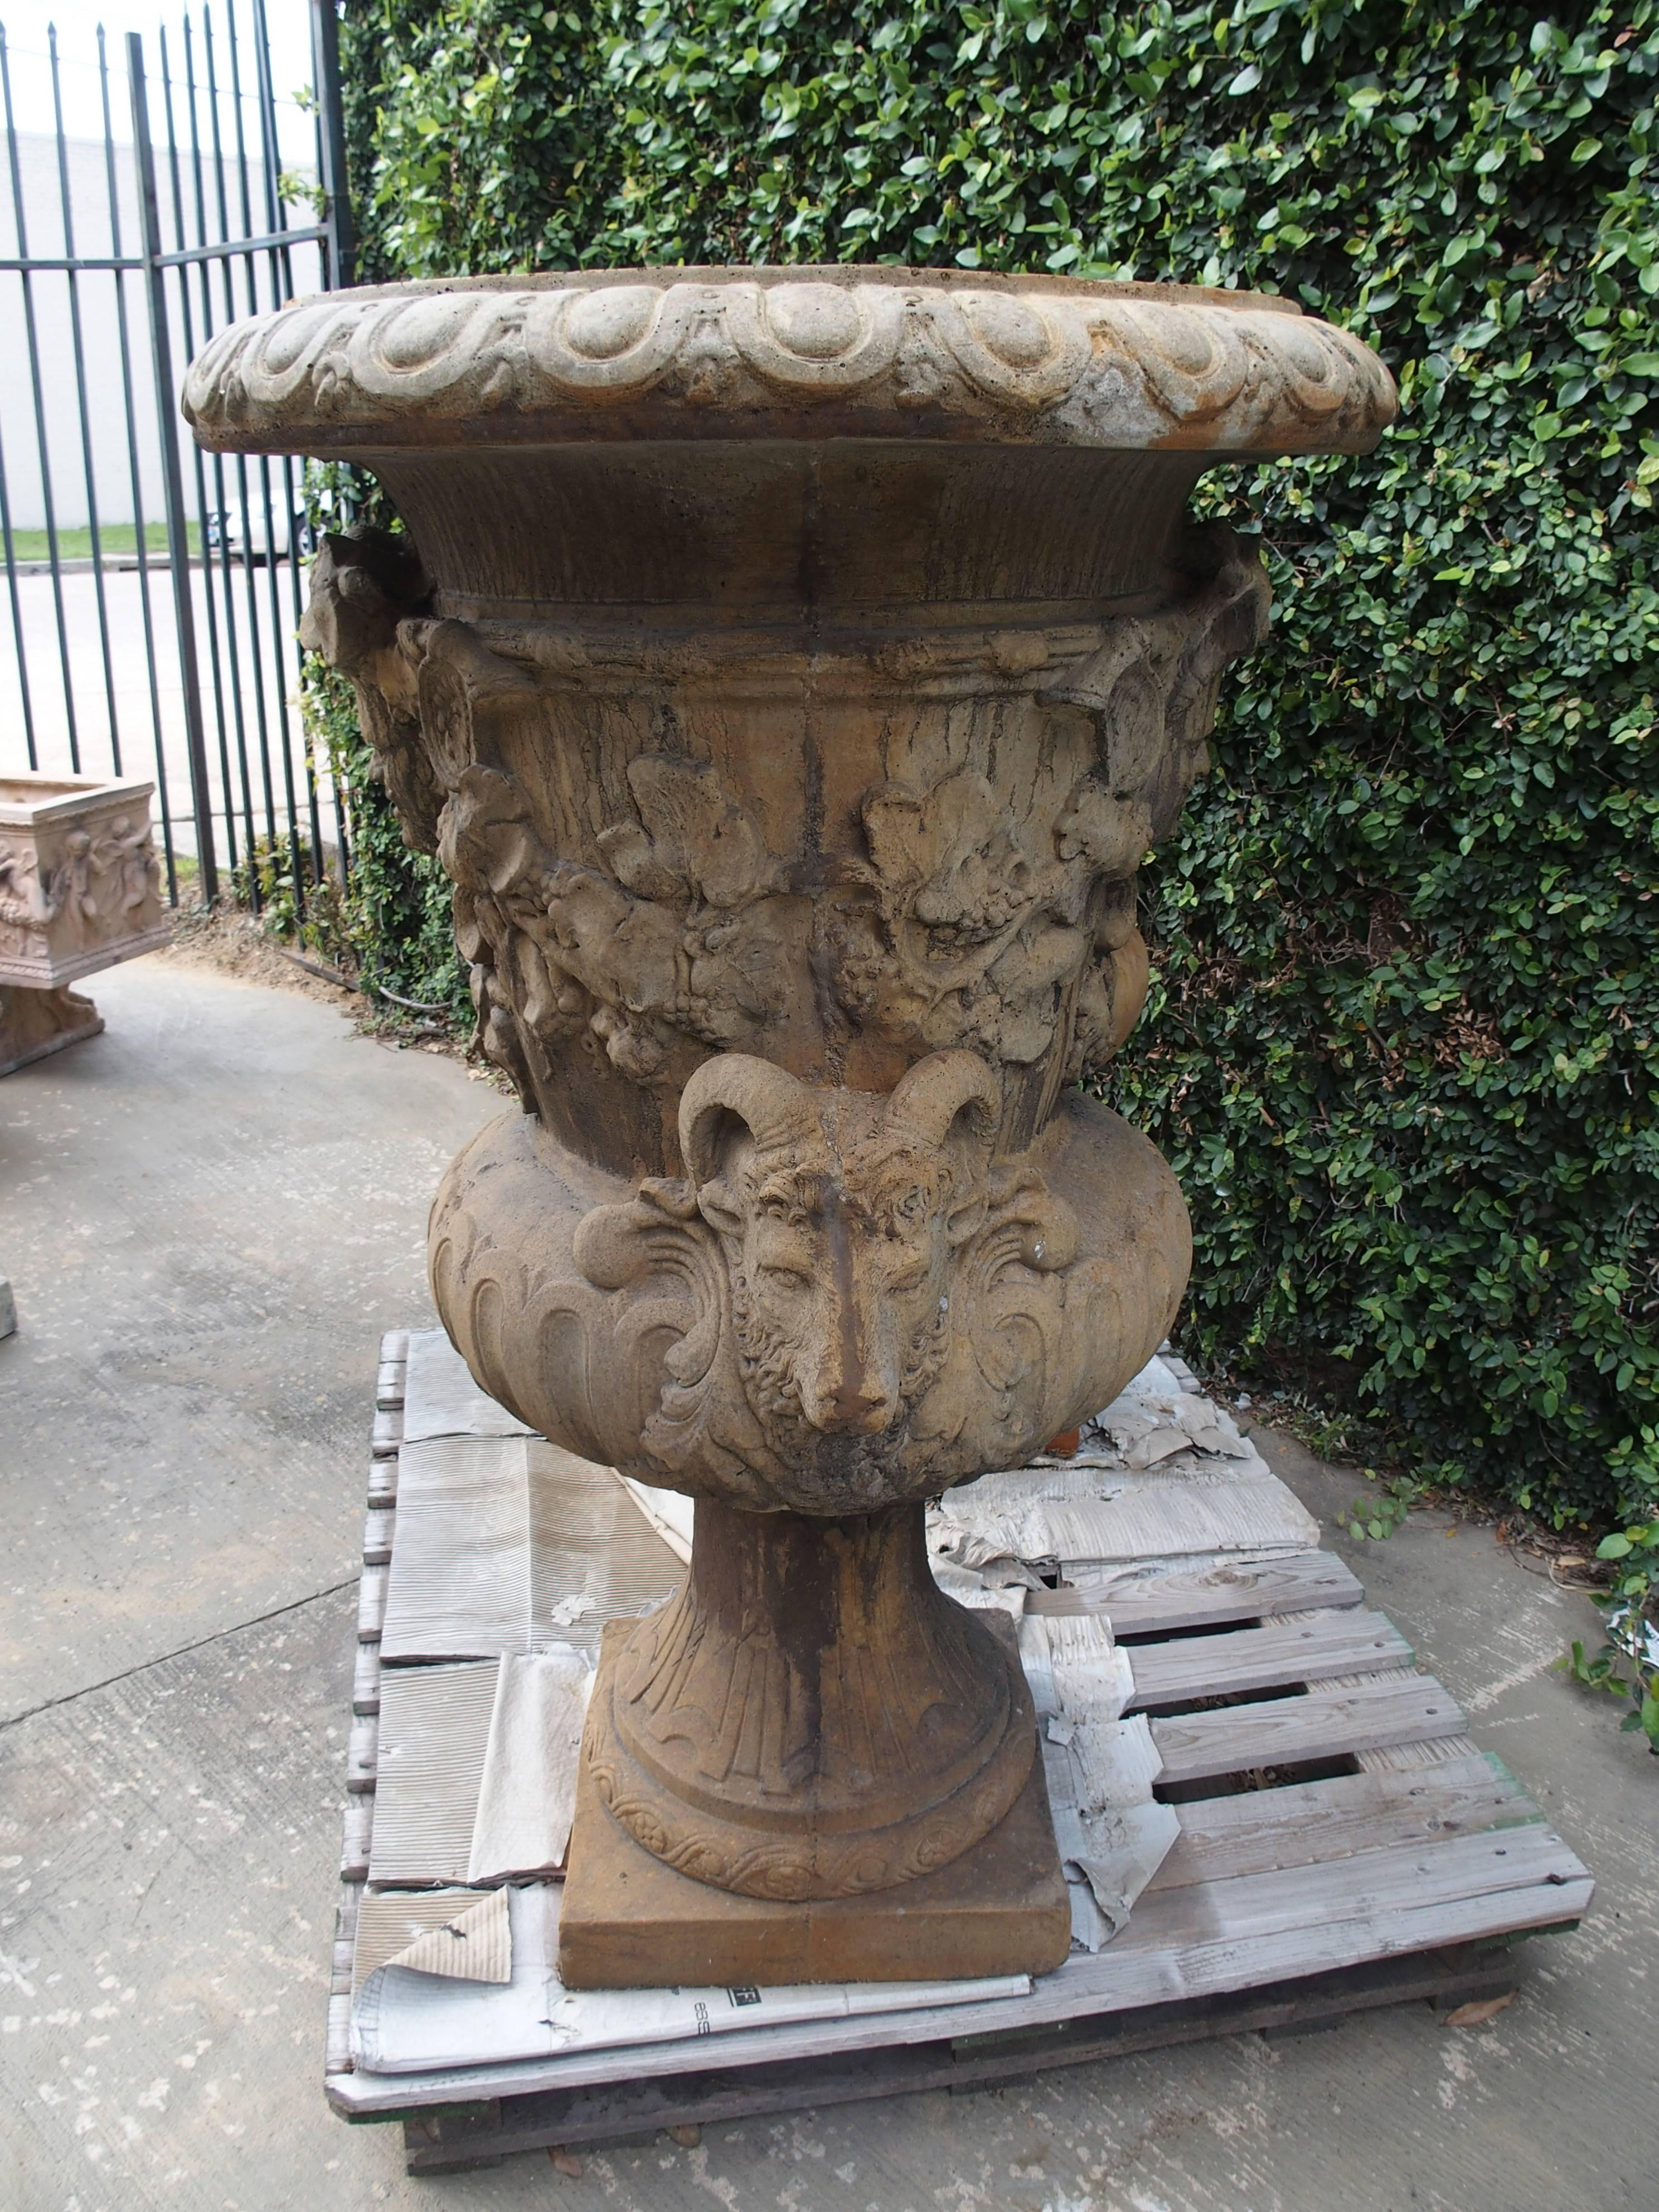 Pair of Large European Cast Garden Urns with Mascarons, Rams Heads, and Grape  2